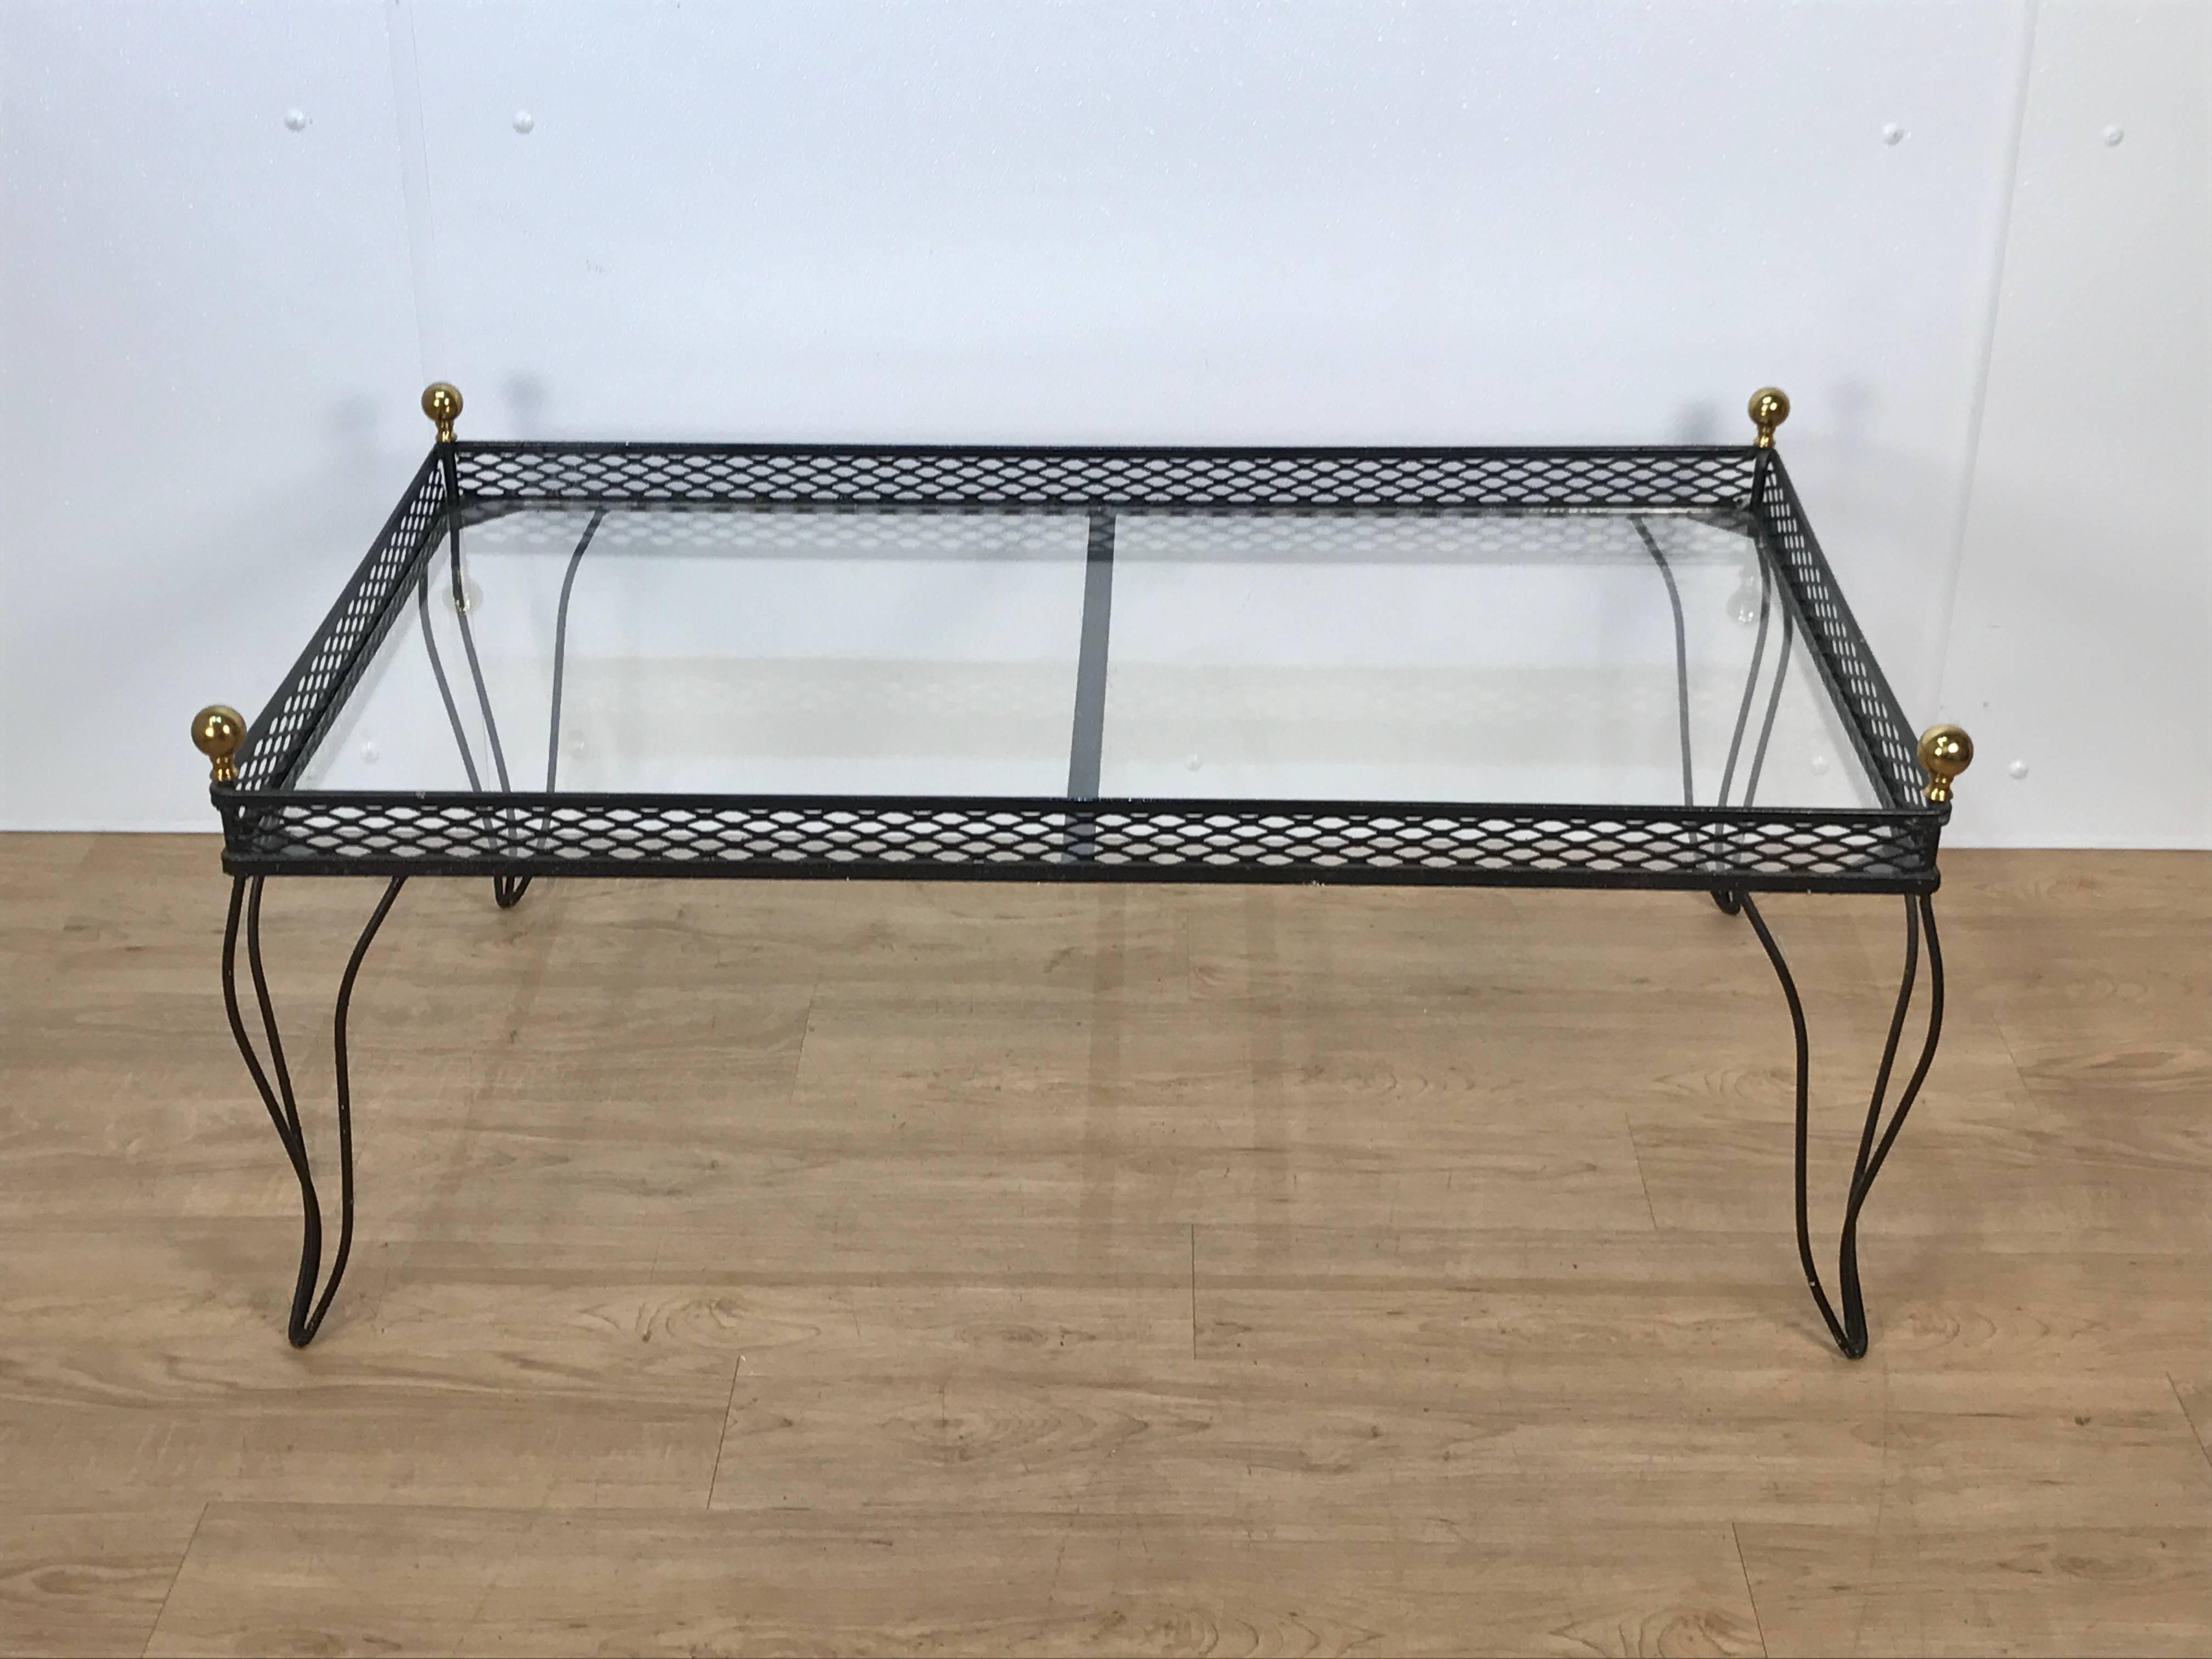 Royère style Salterini coffee table, of rectangular form with four brass orbs at each corner, reticulated gallery edge with removable inset clear glass top, raised on four wire work cabriole legs. Can be used indoors or outdoors.